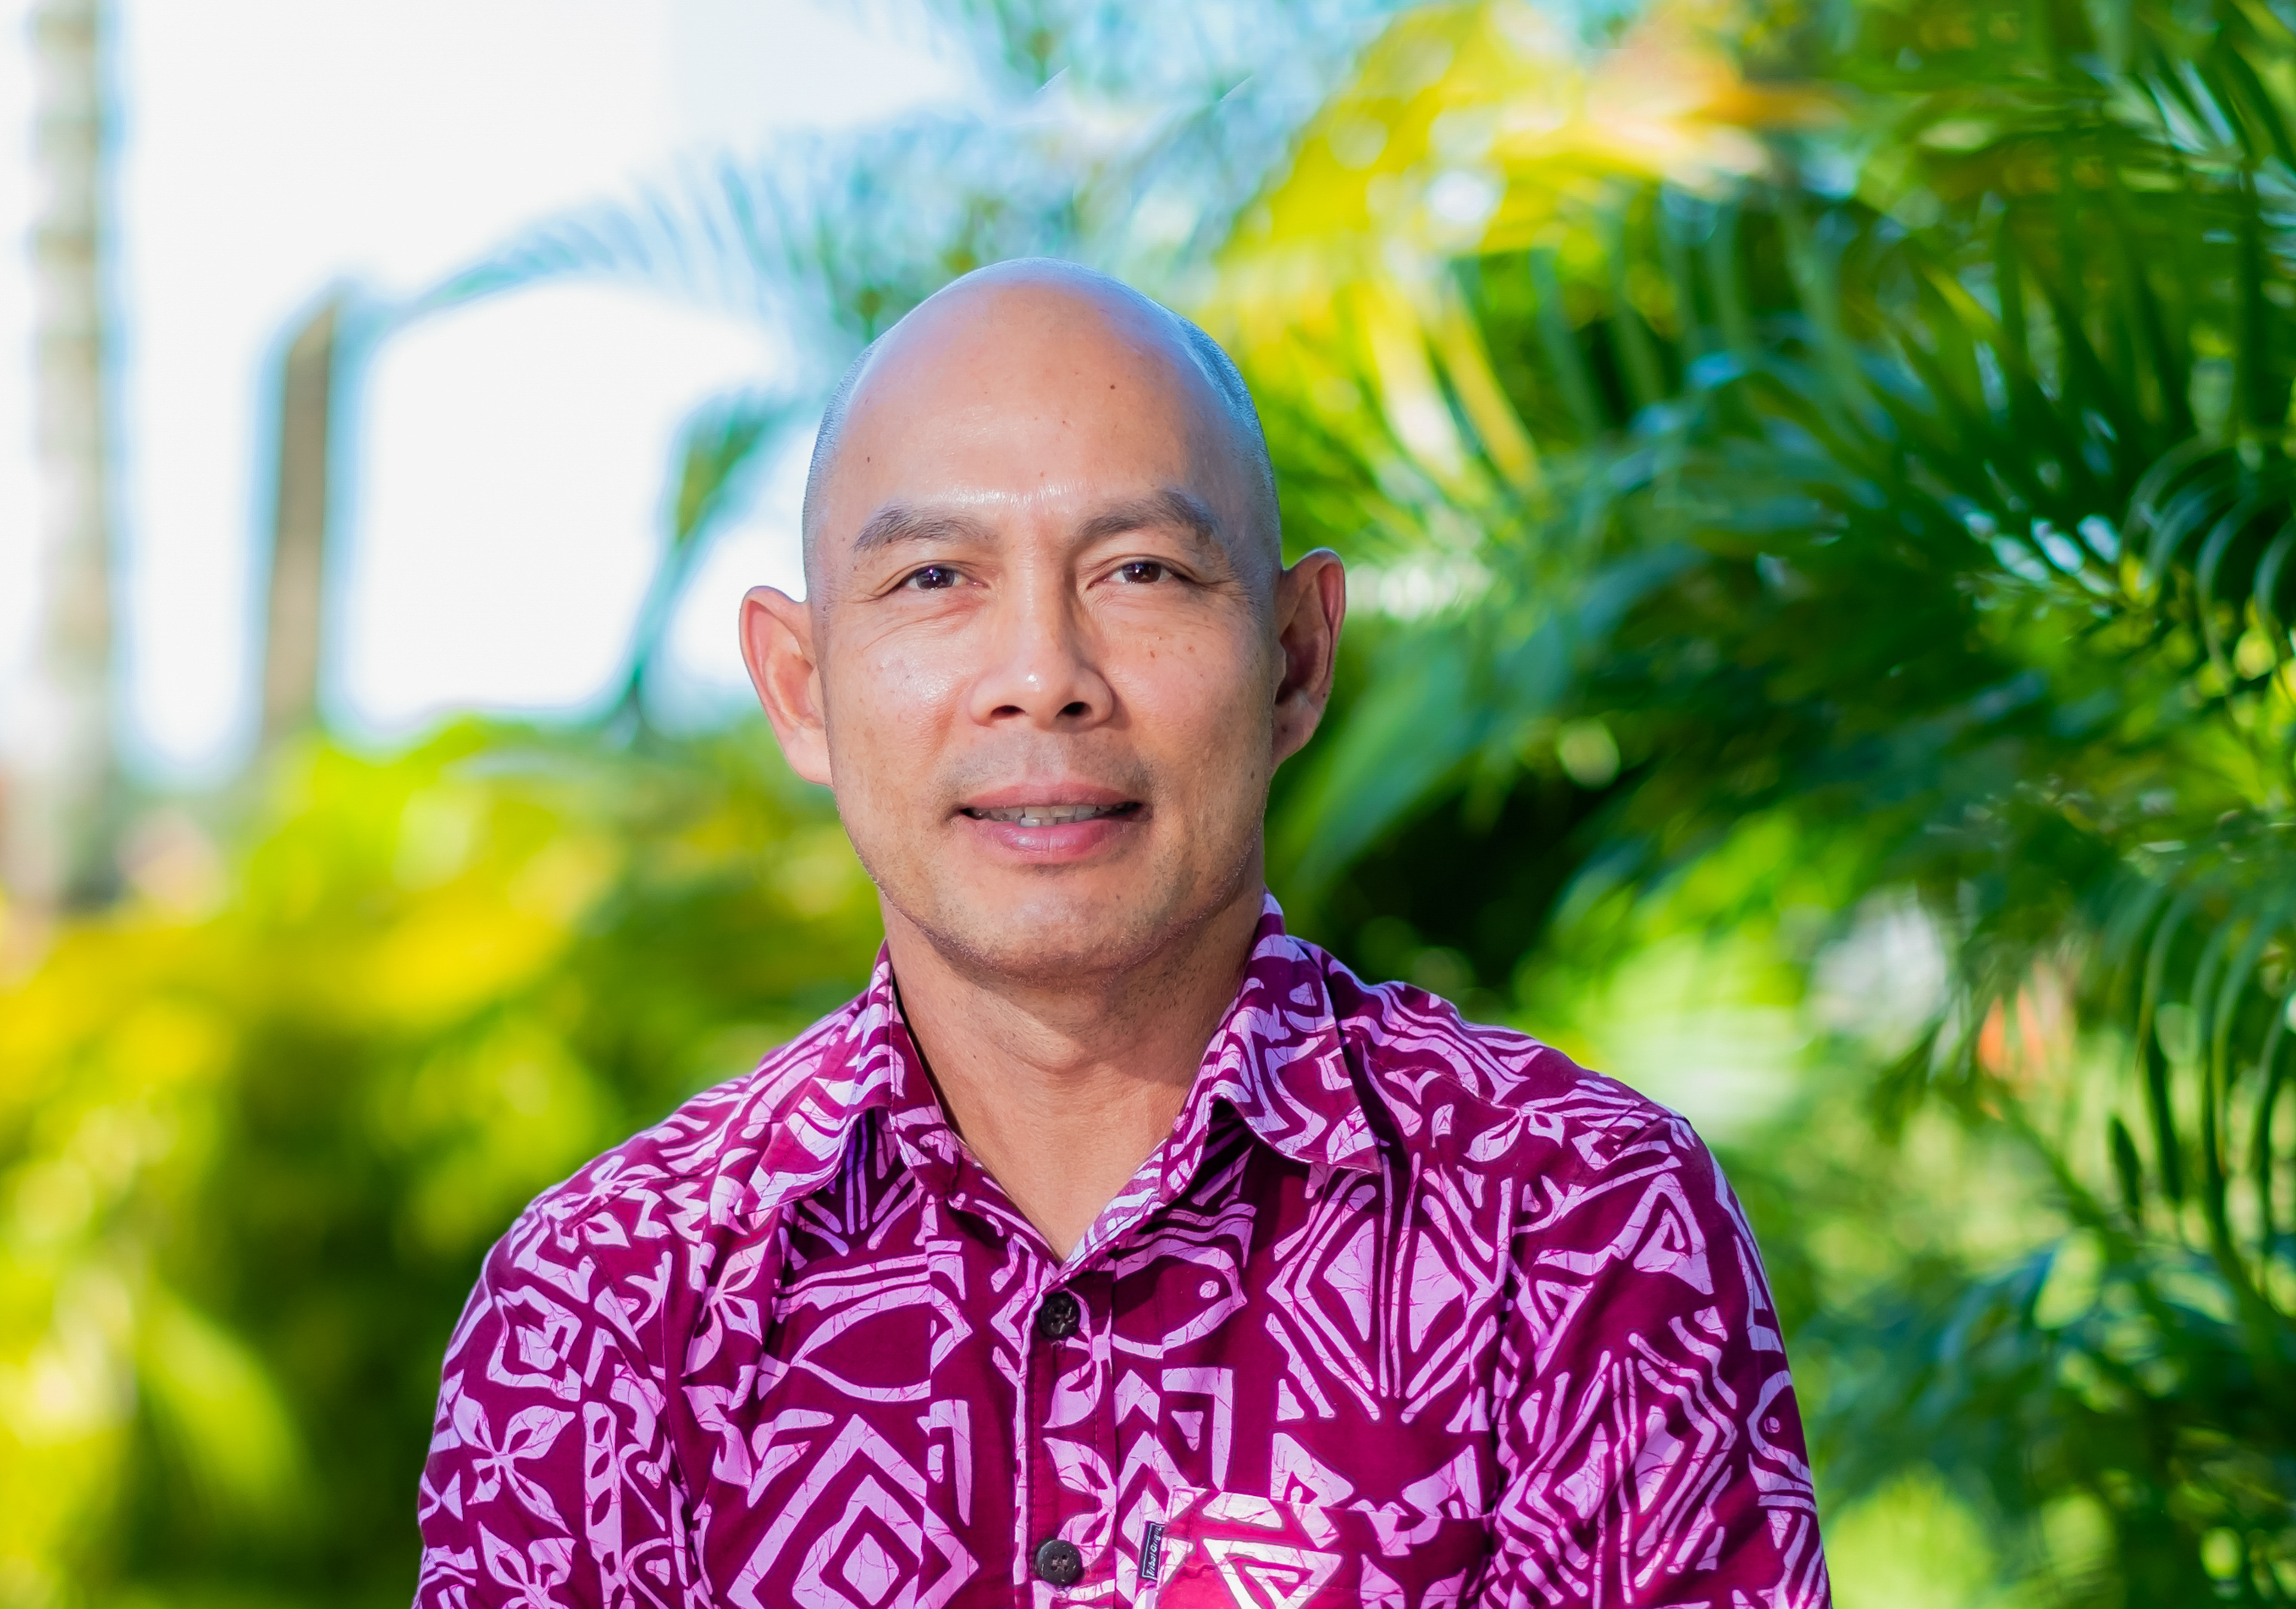 By Miles Young, Director of the Pacific Community's (SPC) Human Rights and Social Development Division